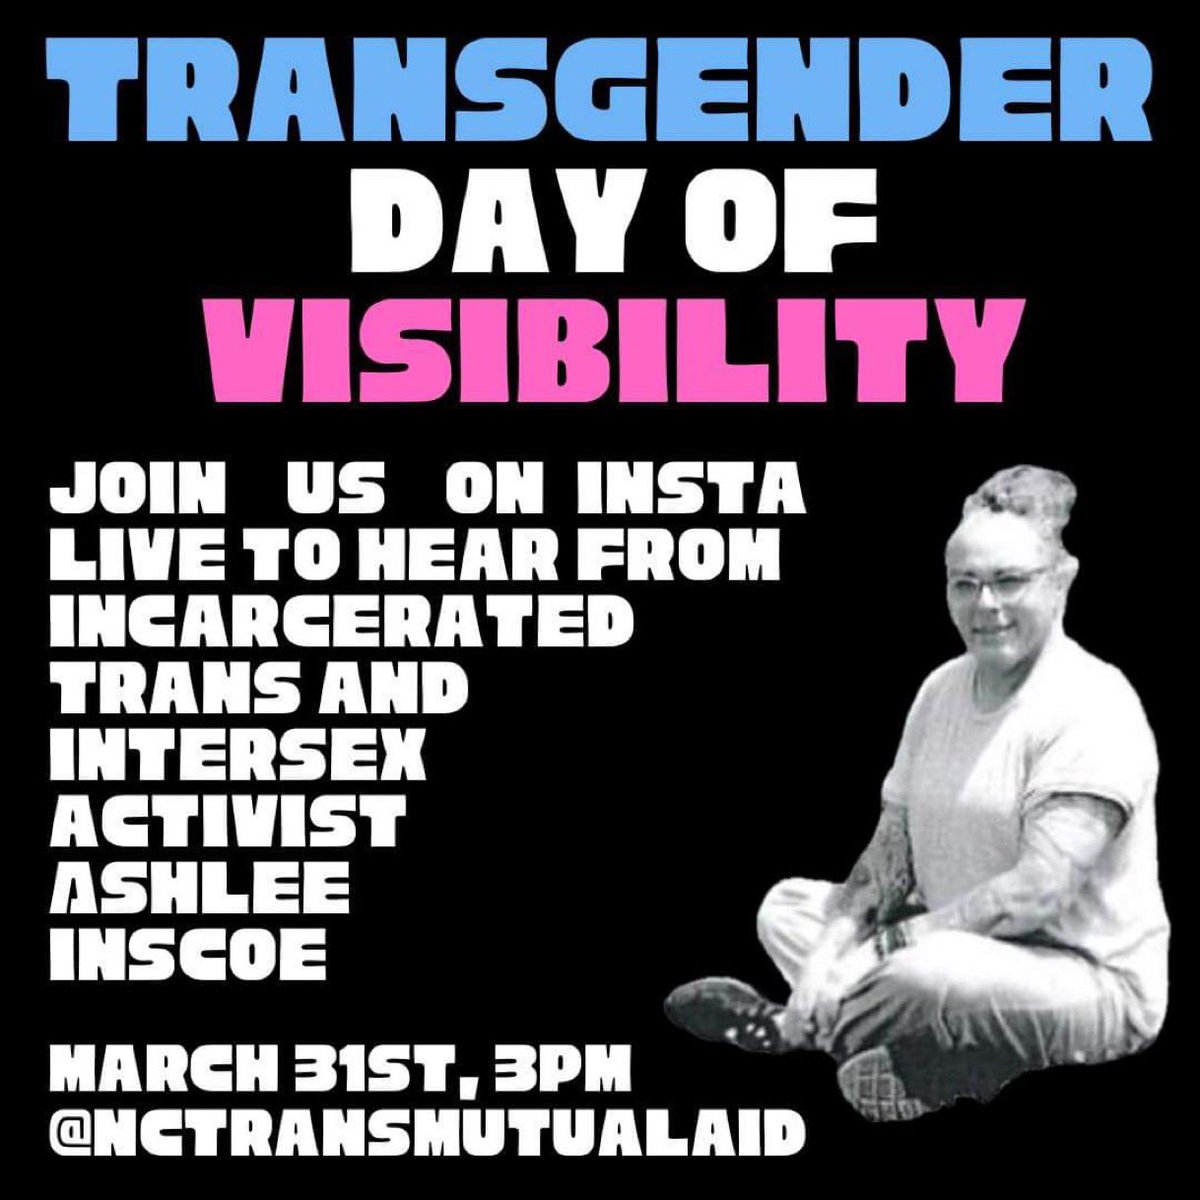 On 3/31 join Nctransmutualaid and Ashlee Inscoe on IG live at 3pm for trans day of visibility. Ashlee is an incarcerated intersex transgender activist who is being held in a men’s facility in NC.